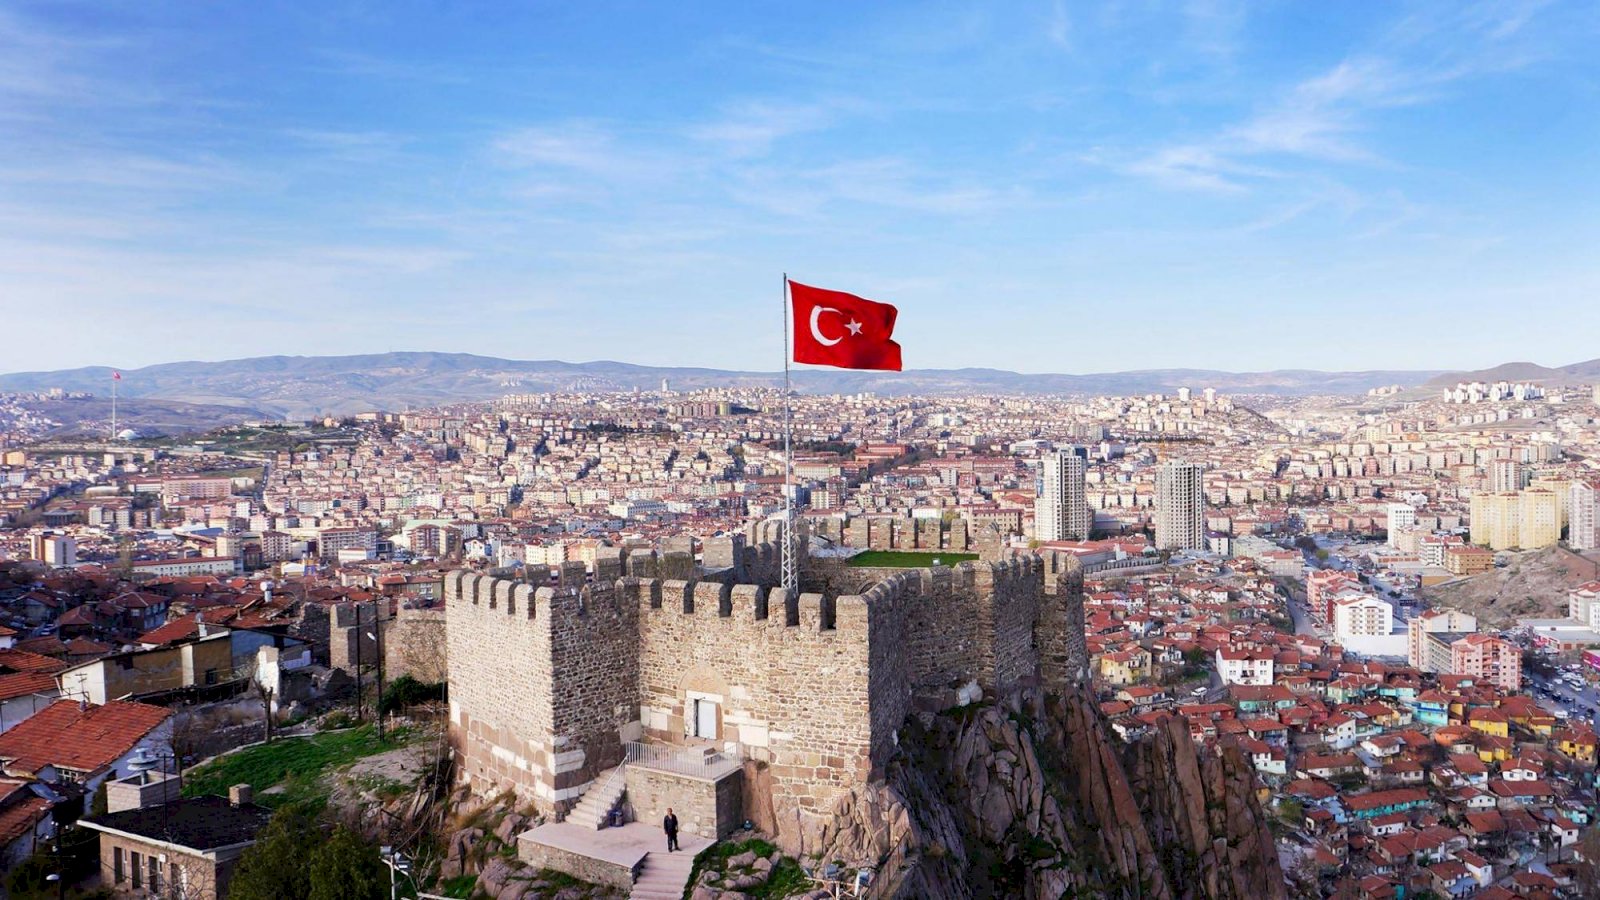 One day in Ankara: Exploring the citadel and witnessing its Roman